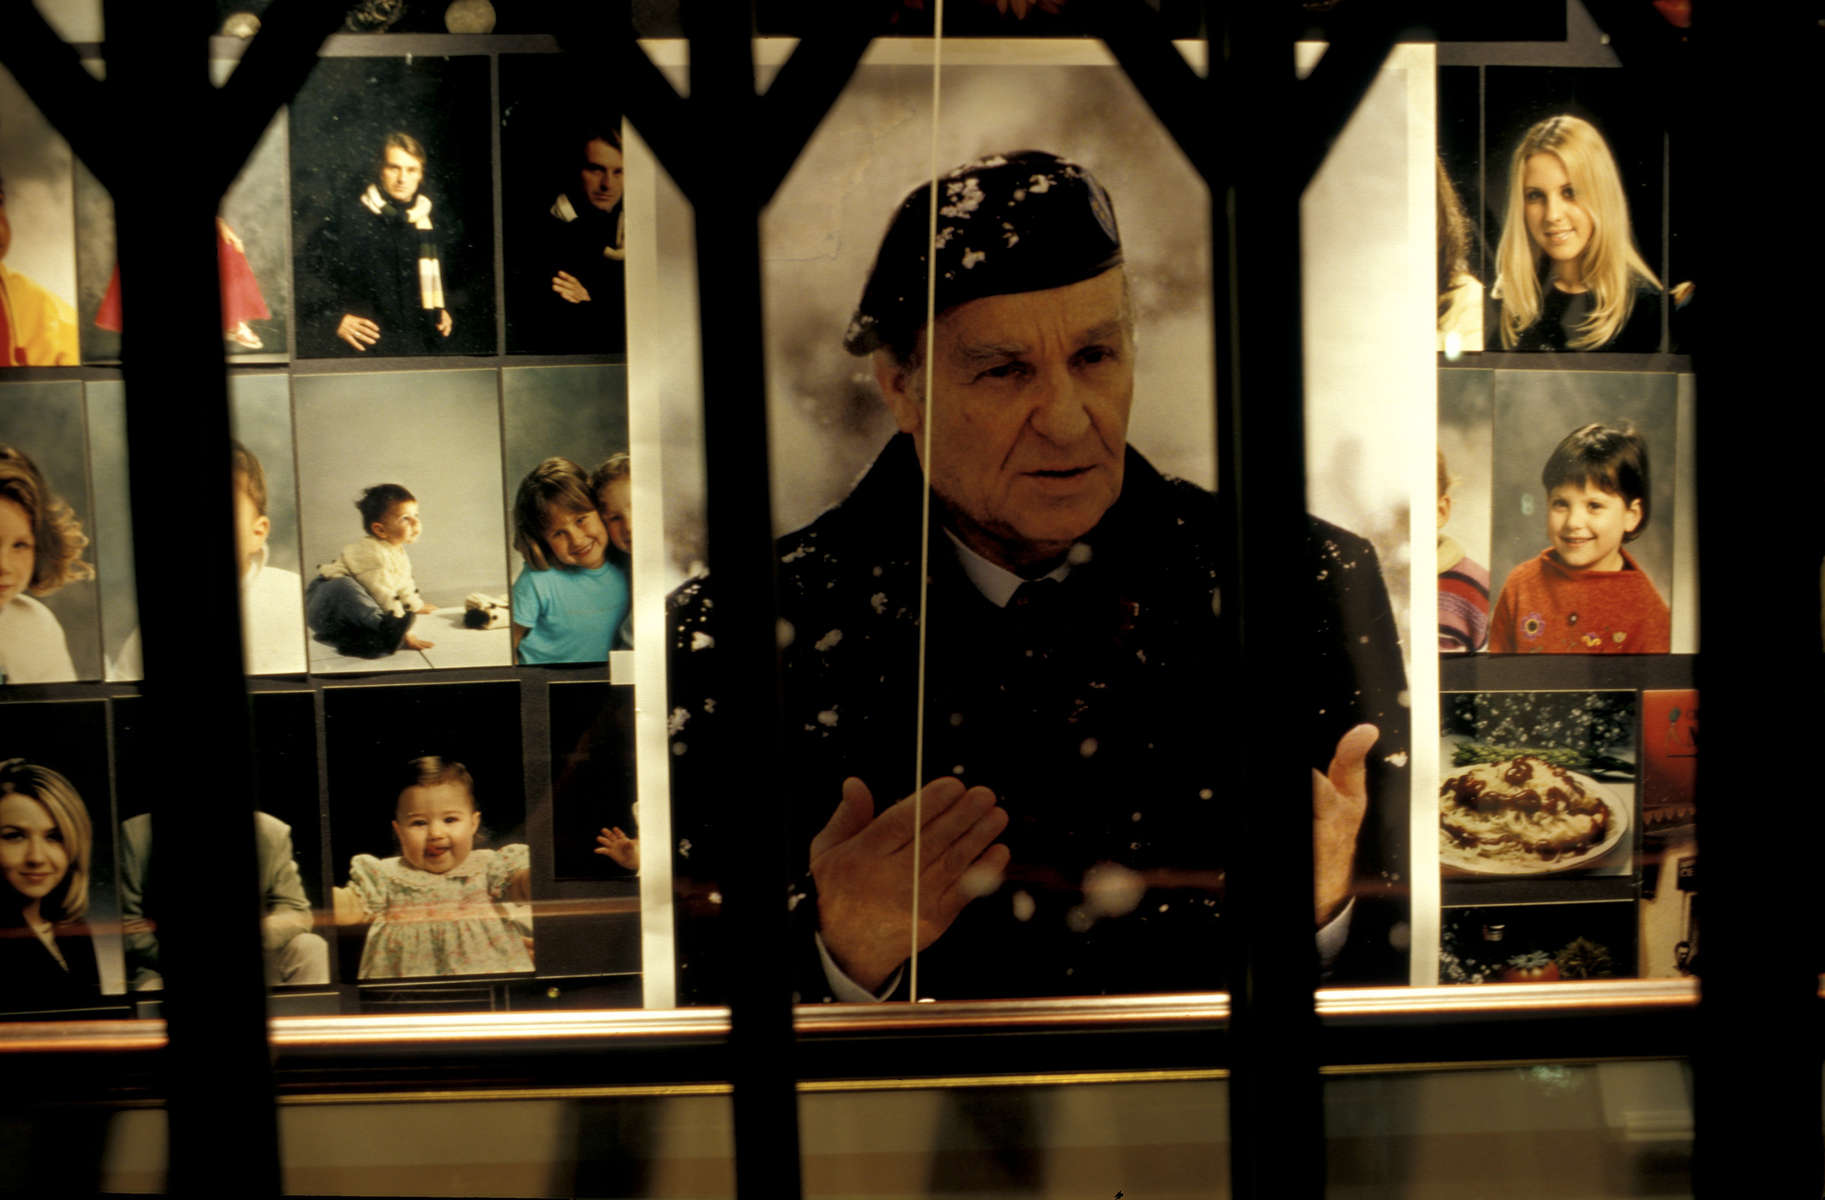 A photo of Alija Izetbegovic, who served as president of Bosnia during the war, and who resisted Western efforts to force him to agree to demands from Serbia and Croatia to carve up the country. After his death in November, 2003, photos of Izetbegovic in his trademark beret sprang up all over Sarajevo, and remained in place months later. March 2004.